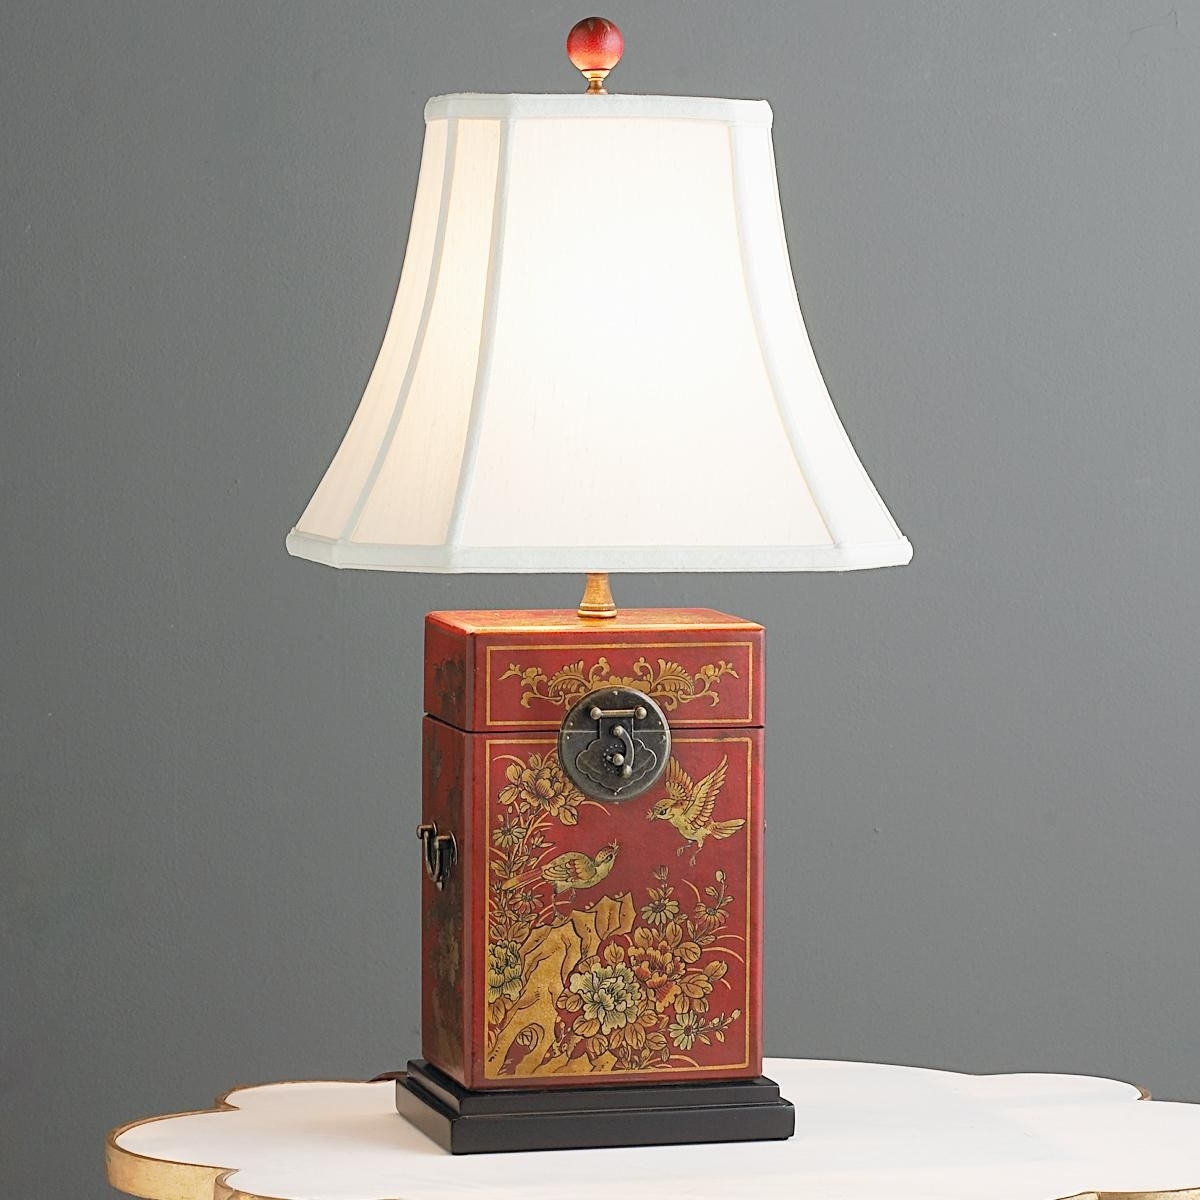 Decorative Sculpture Lampshade Lampshade Decor Lamp Antique Chinese Figurines Lamp Home Design Antique Embroidered Lampshade